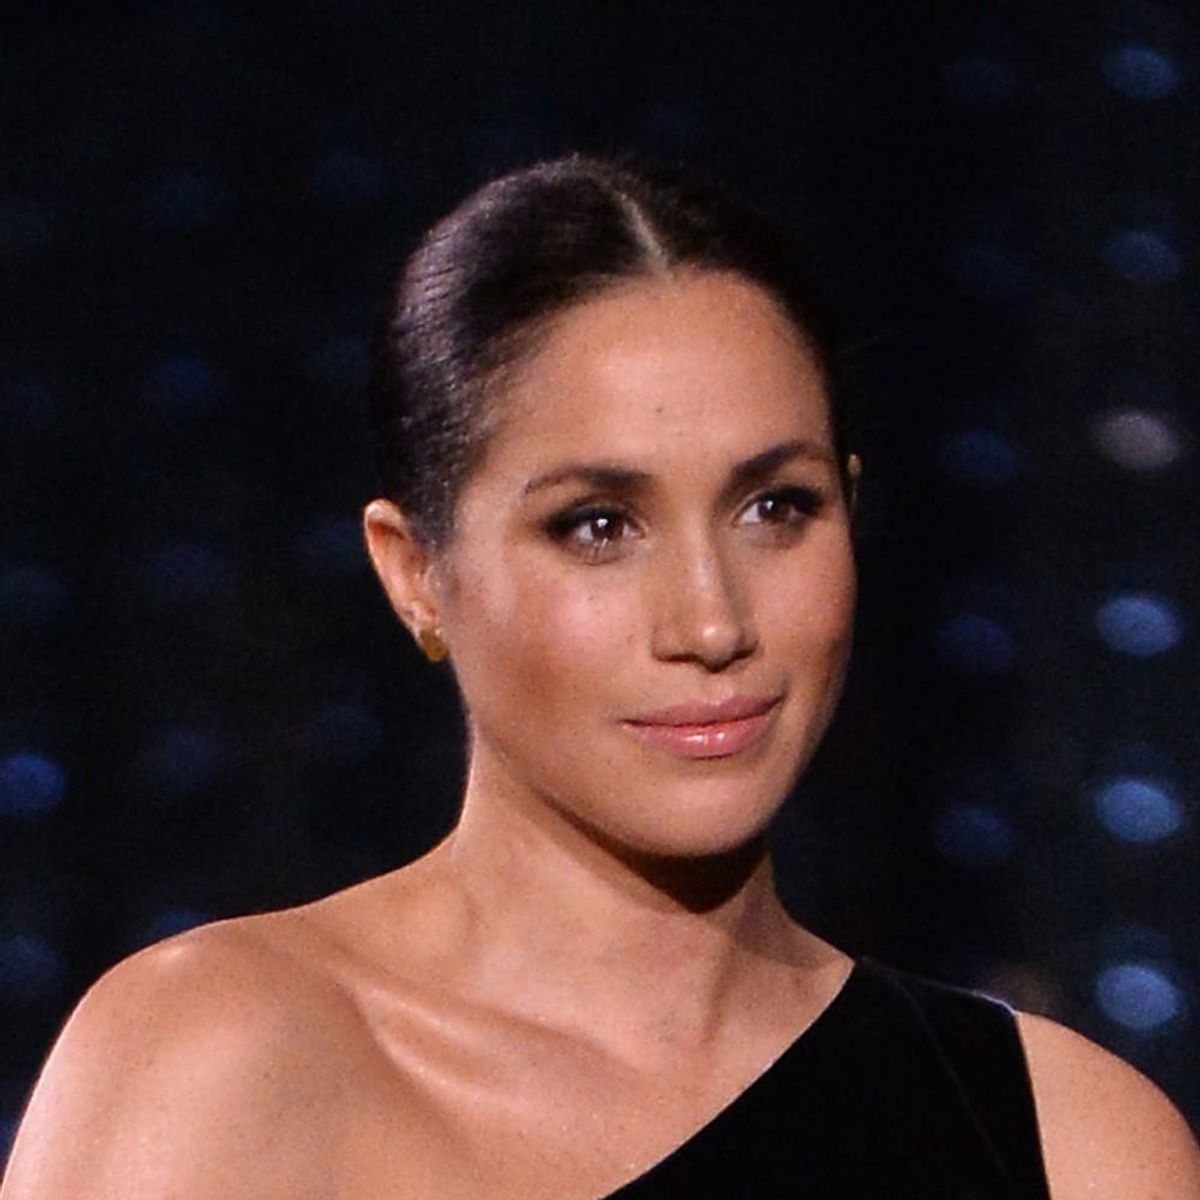 Meghan Markle Ditches Go-To Messy Updo for Polished Bun at British Fashion Awards